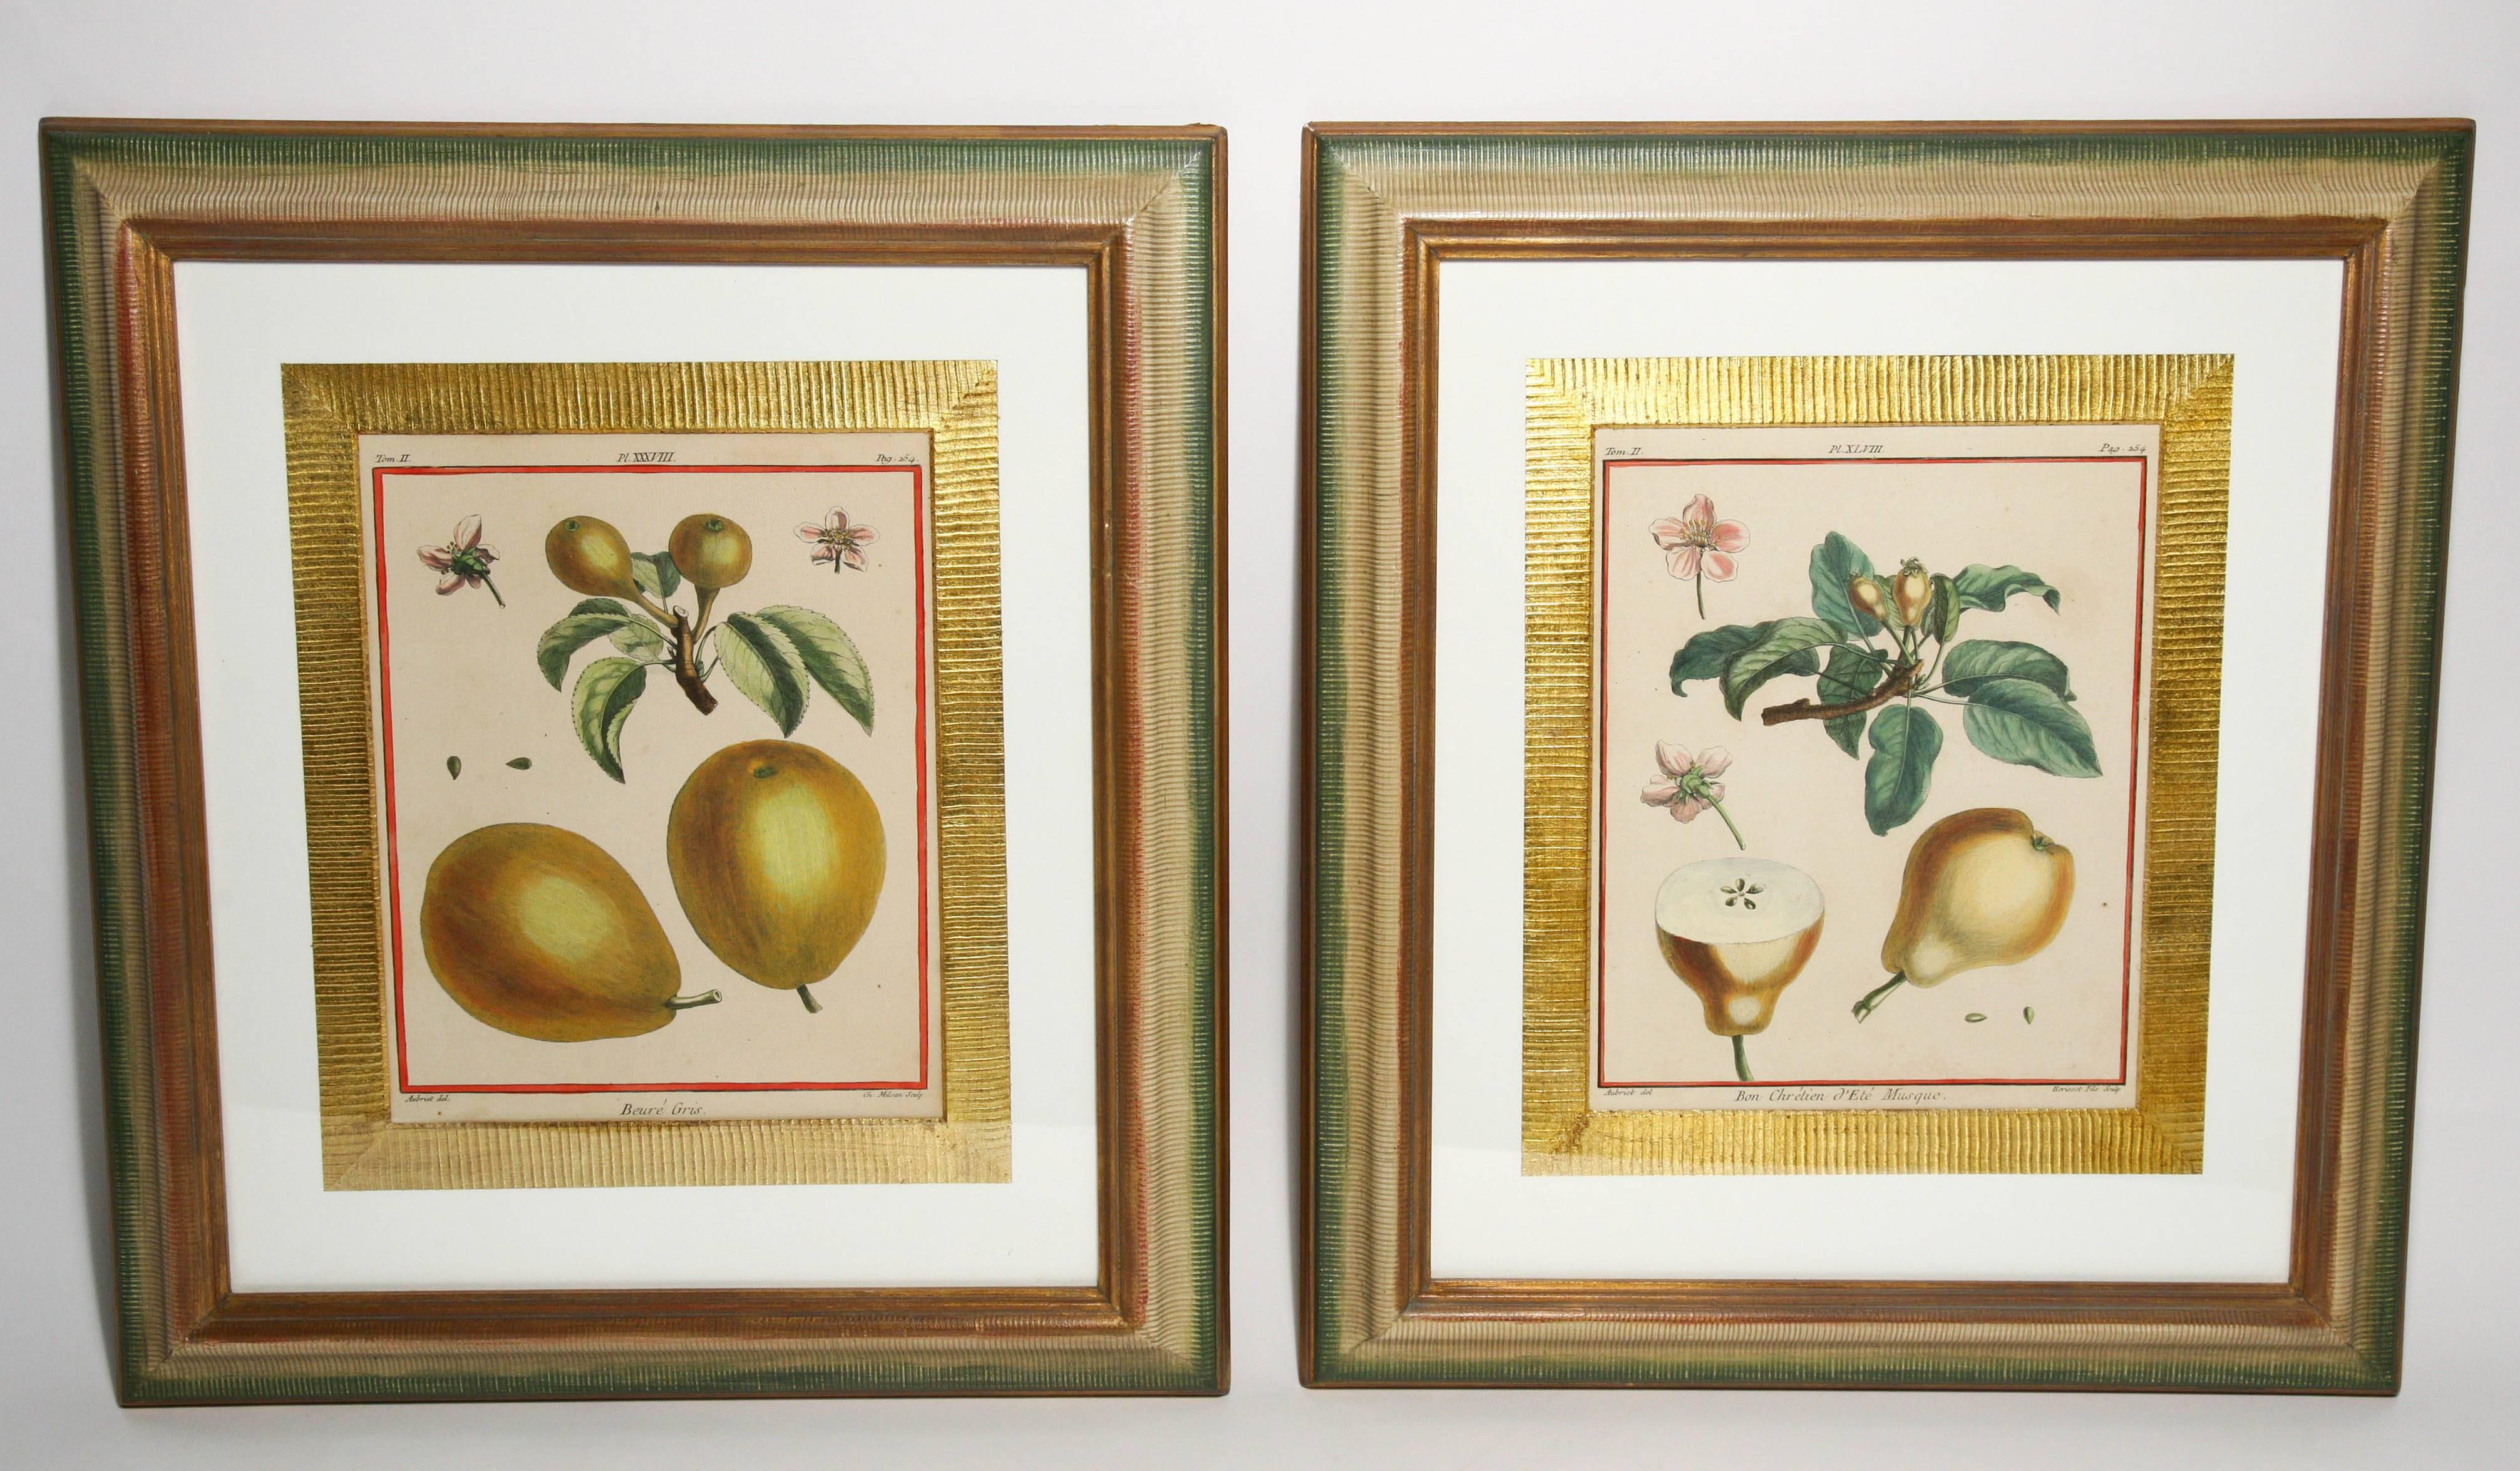 A delightful pair of antique prints from Traite des Arbres Fruitier by Henri-Louis Duhamel du Monceau who was known for his high quality and realistic depictions of fruits. We have a charming pair for sale in wonderful antique condition. Hand